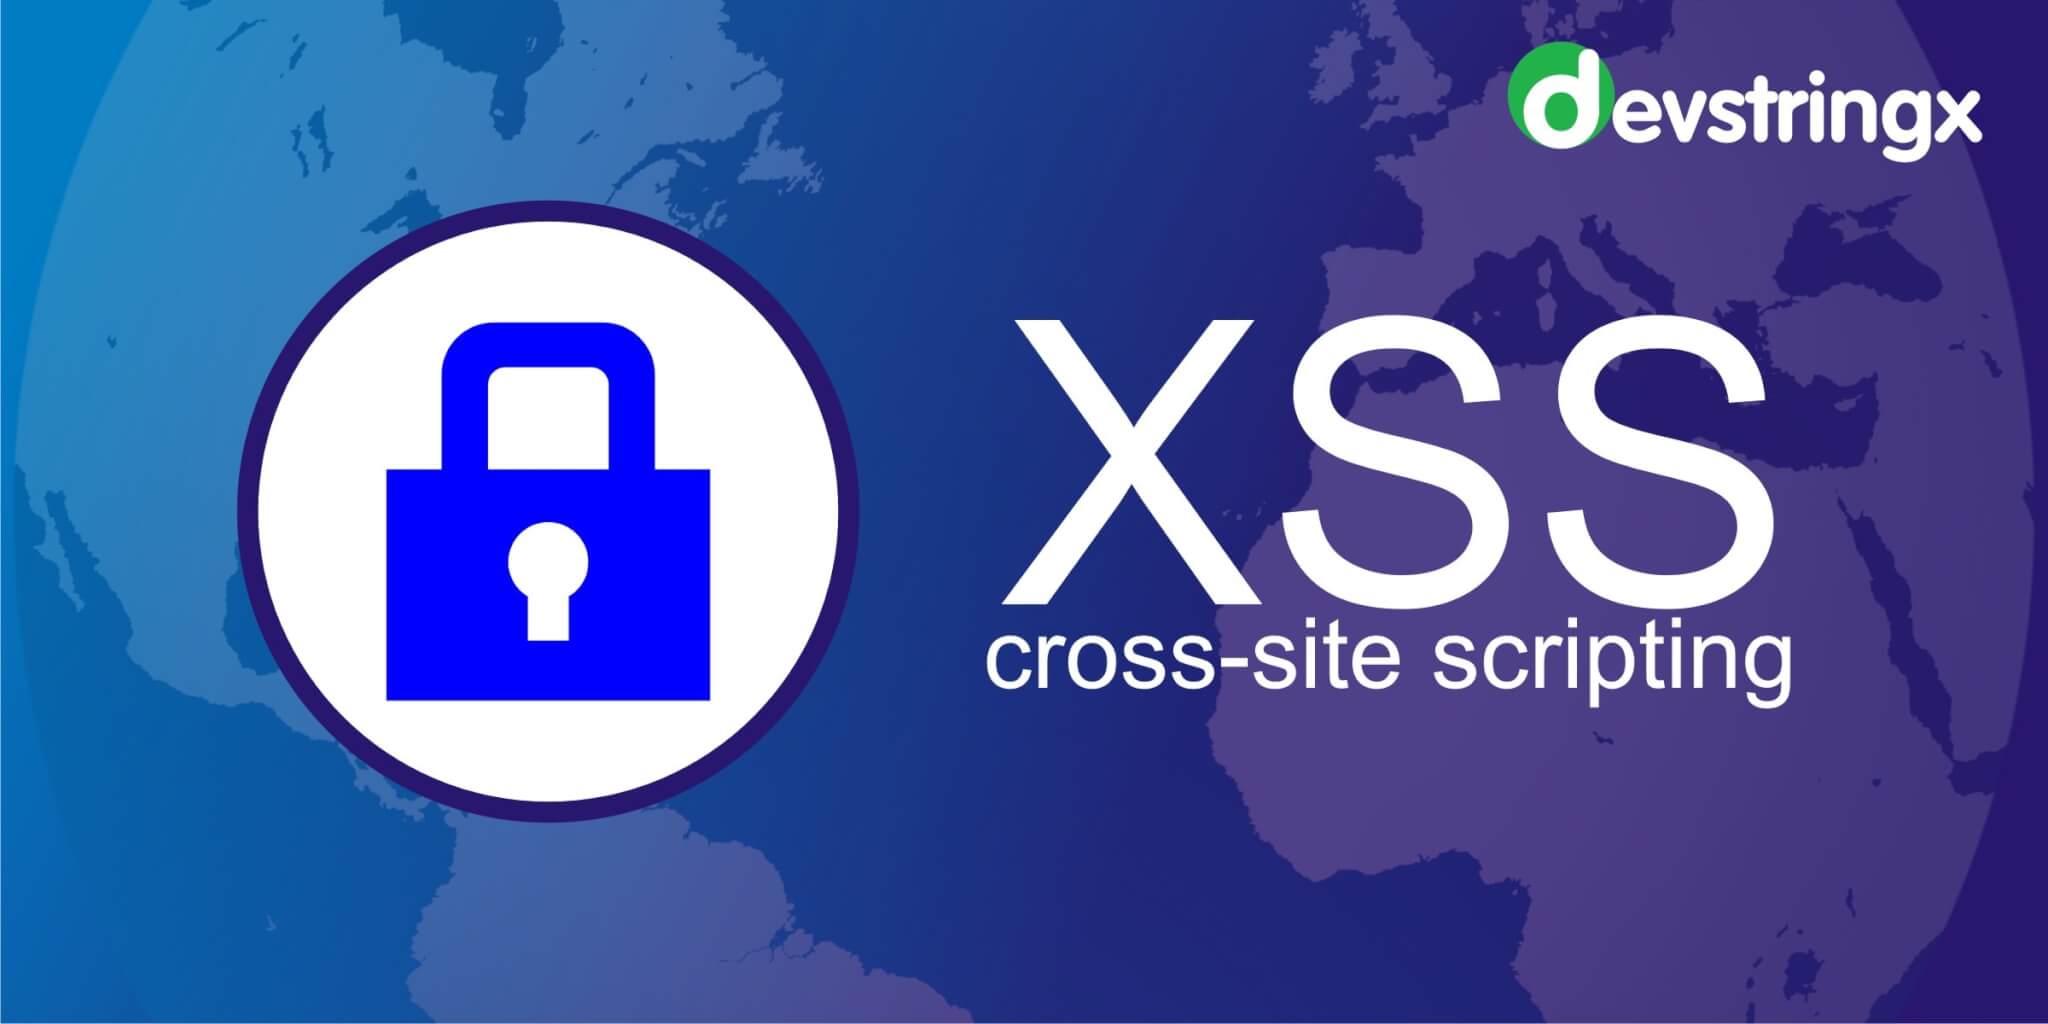 What is Cross-site Scripting (XSS)? Stored, DOM & Reflected Examples